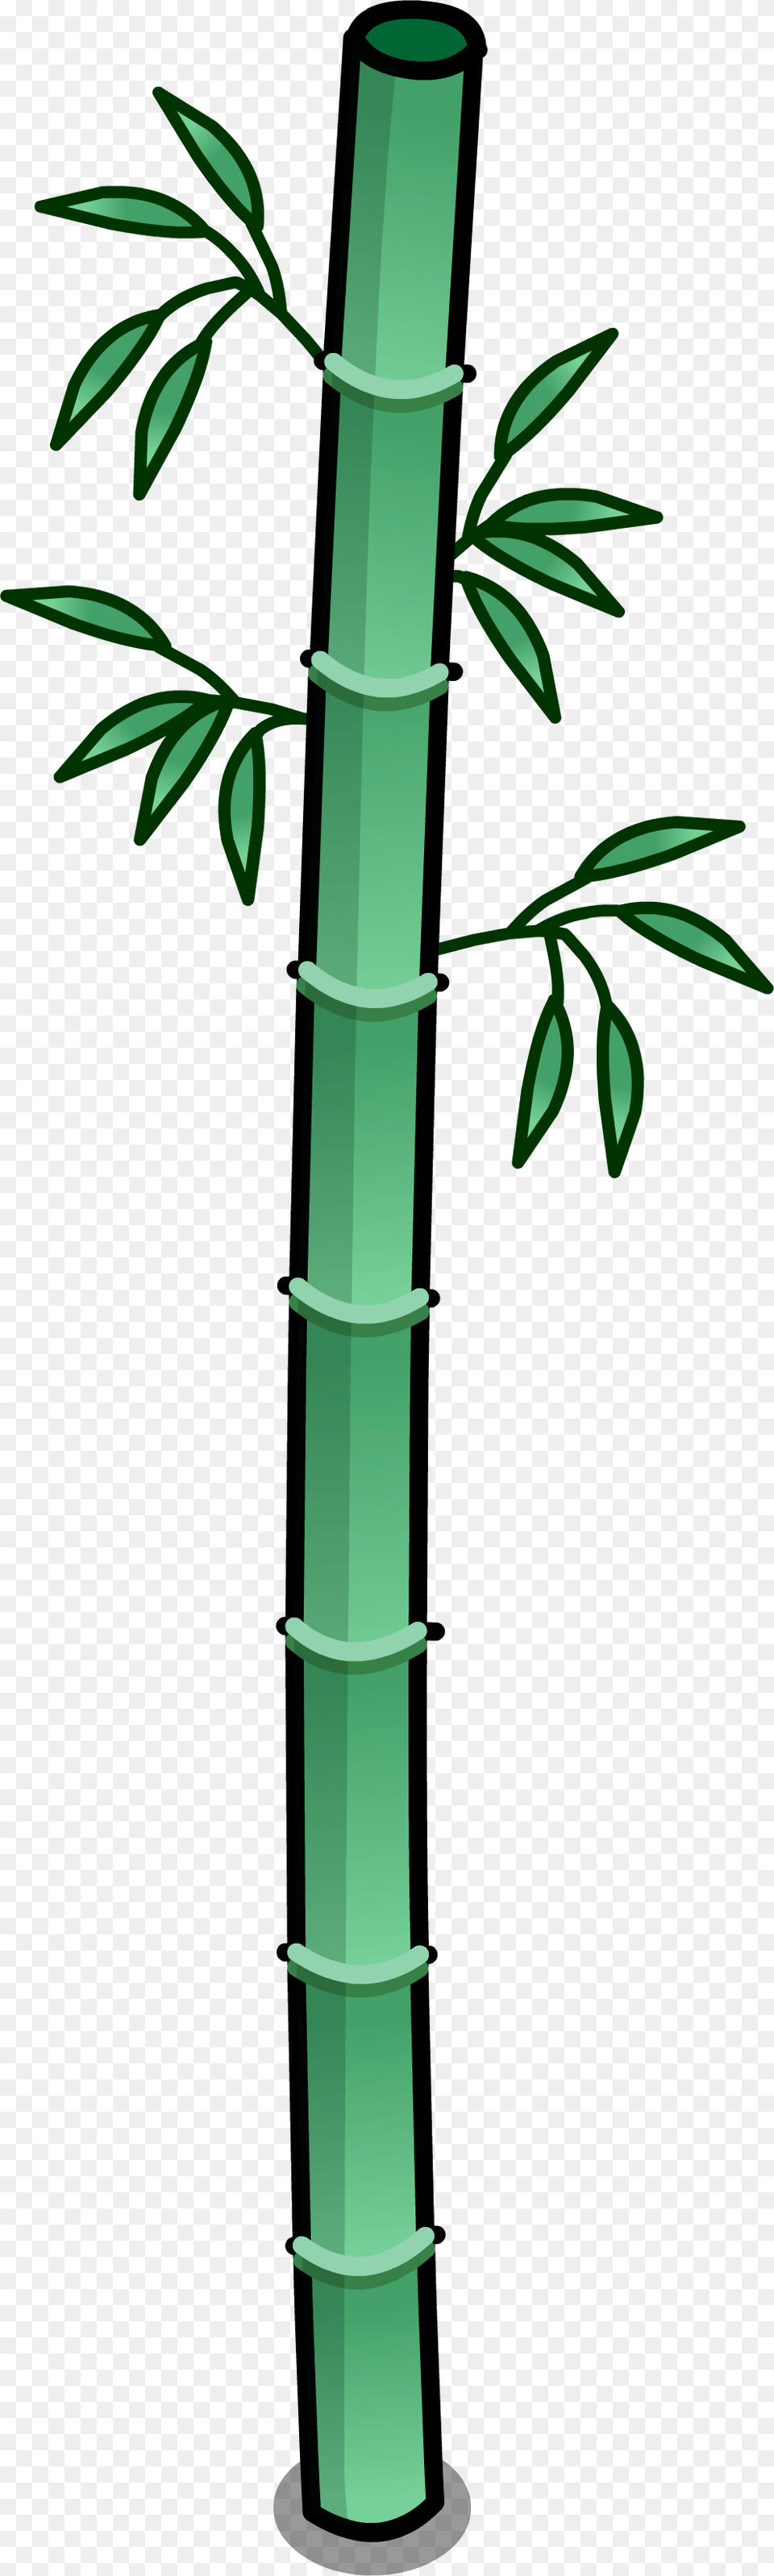 Bamboo Clipart Bamboo Stalk Sprite Bamboo, Plant, Dynamite, Weapon Free Transparent Png